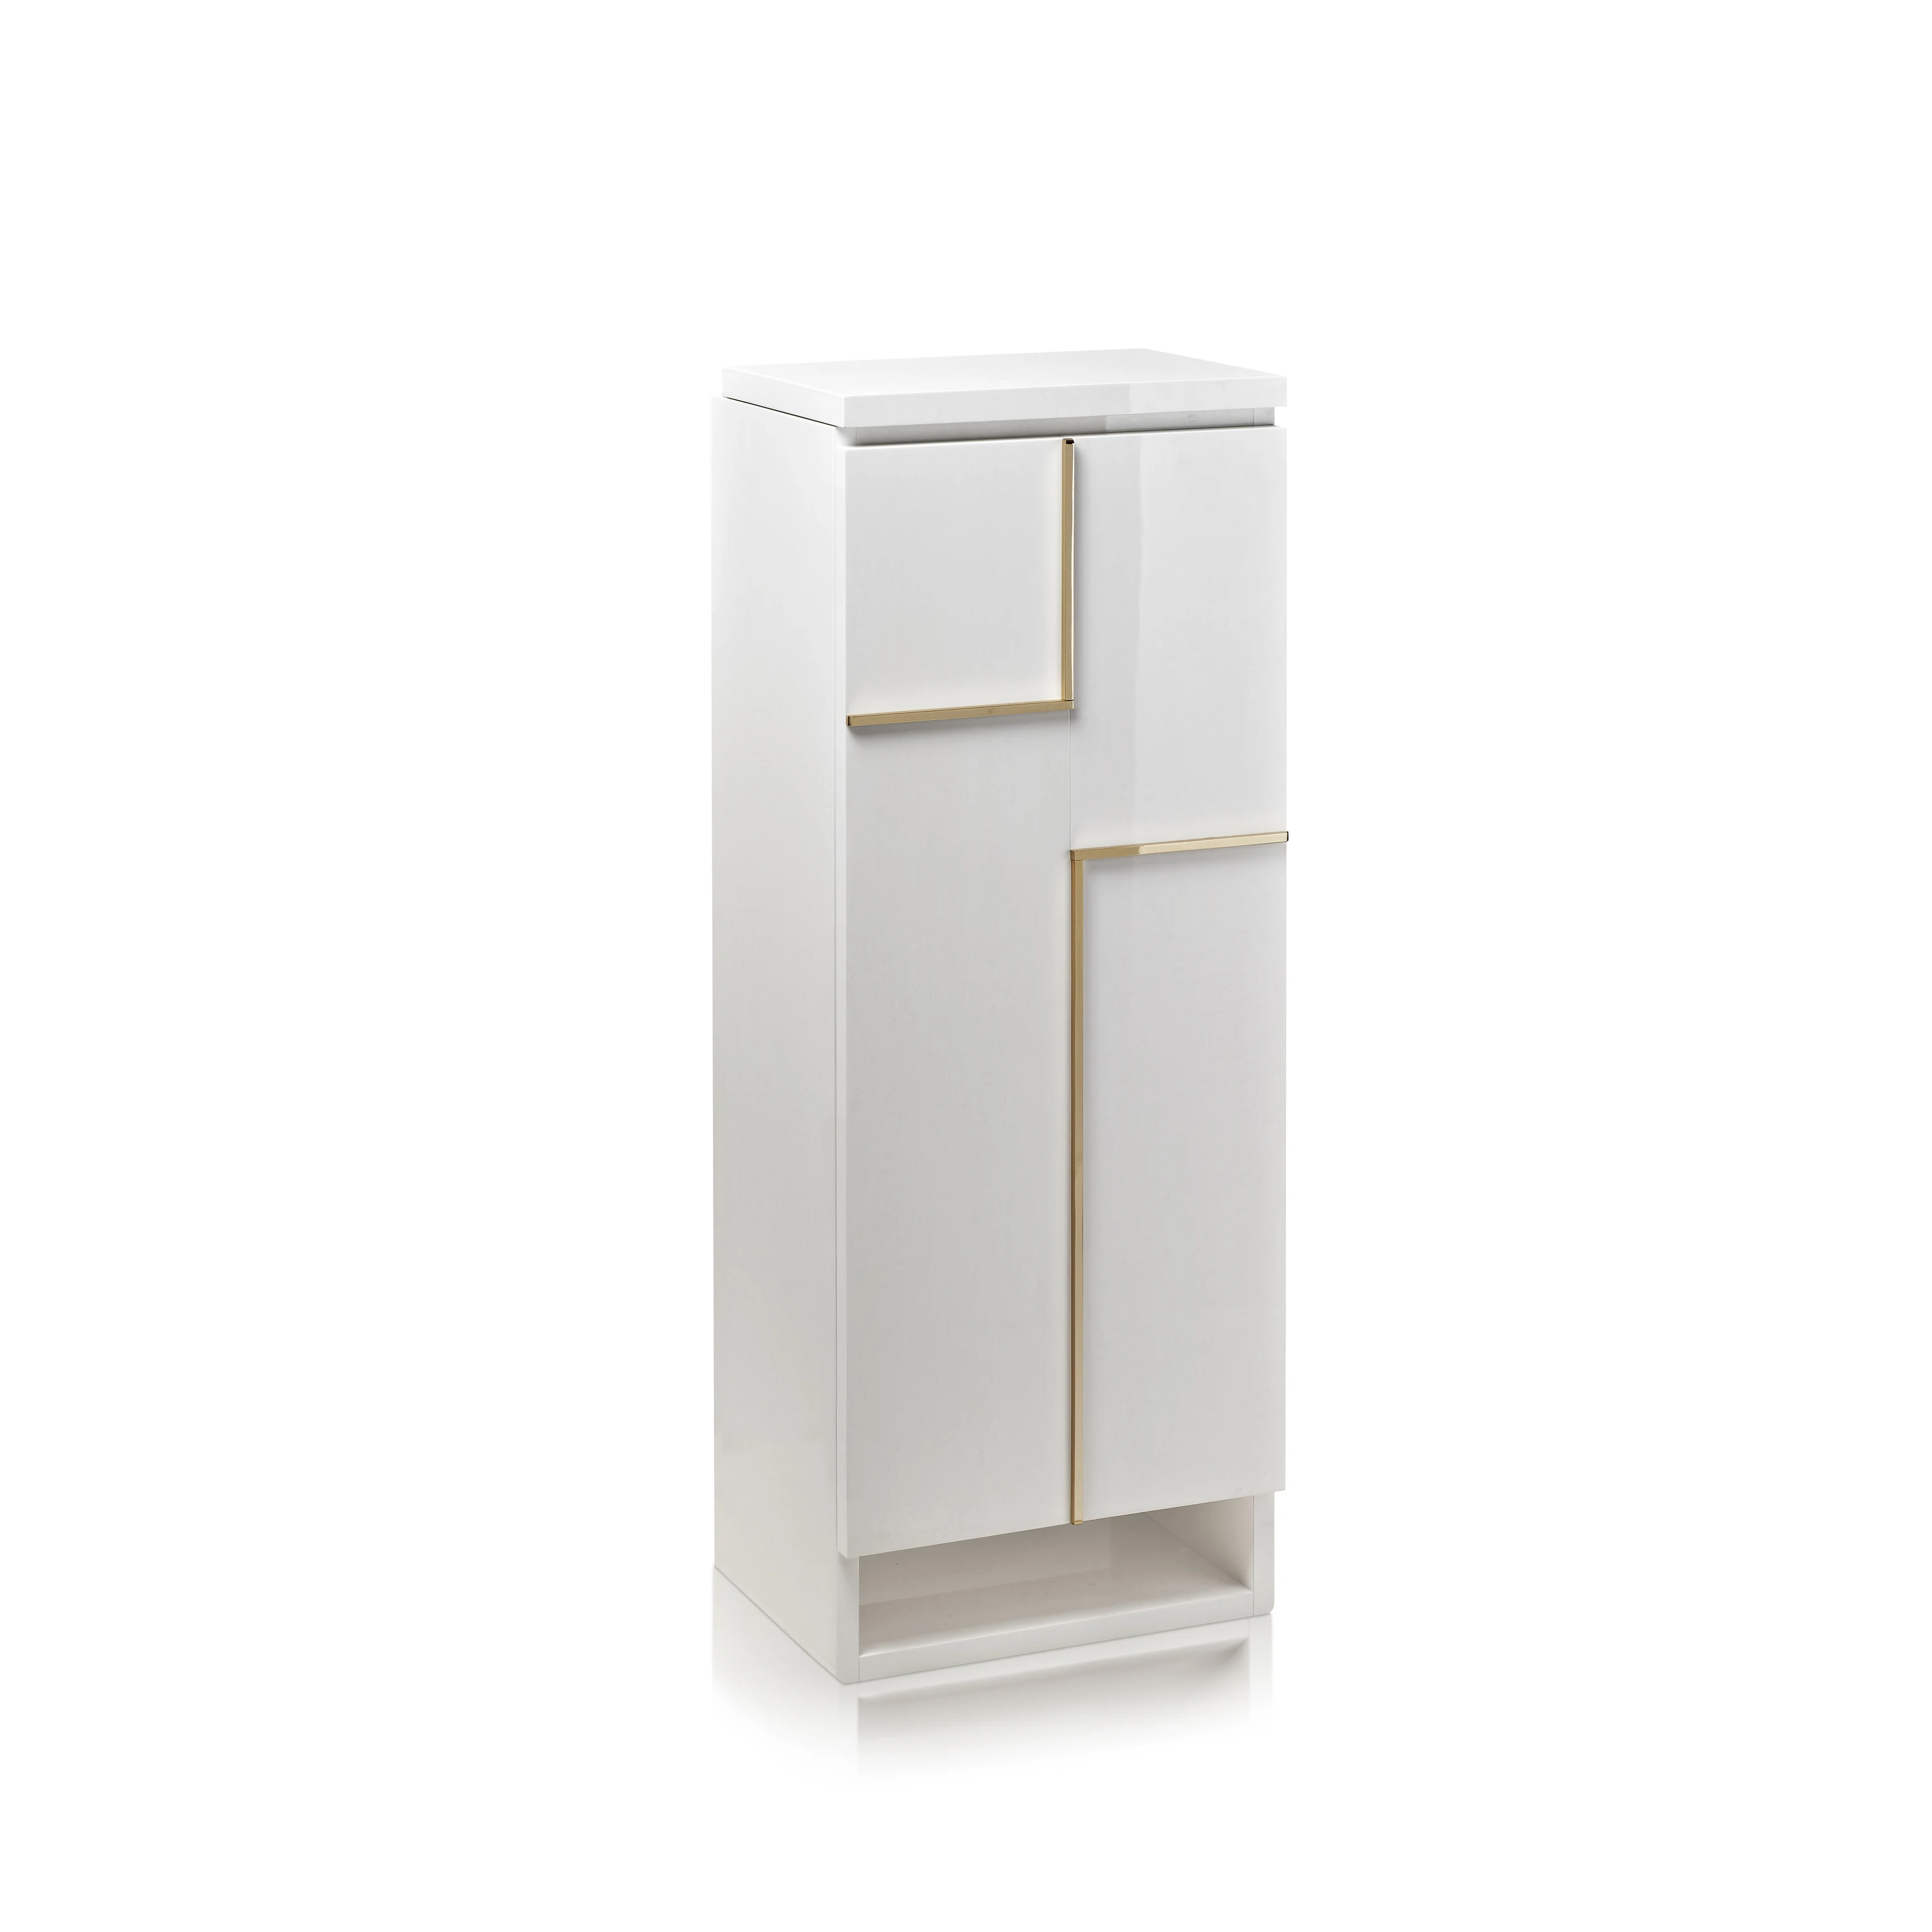 Armored jewelry cabinet in polished white maple, drawers for jewelry, opening with digital Touch Keypad